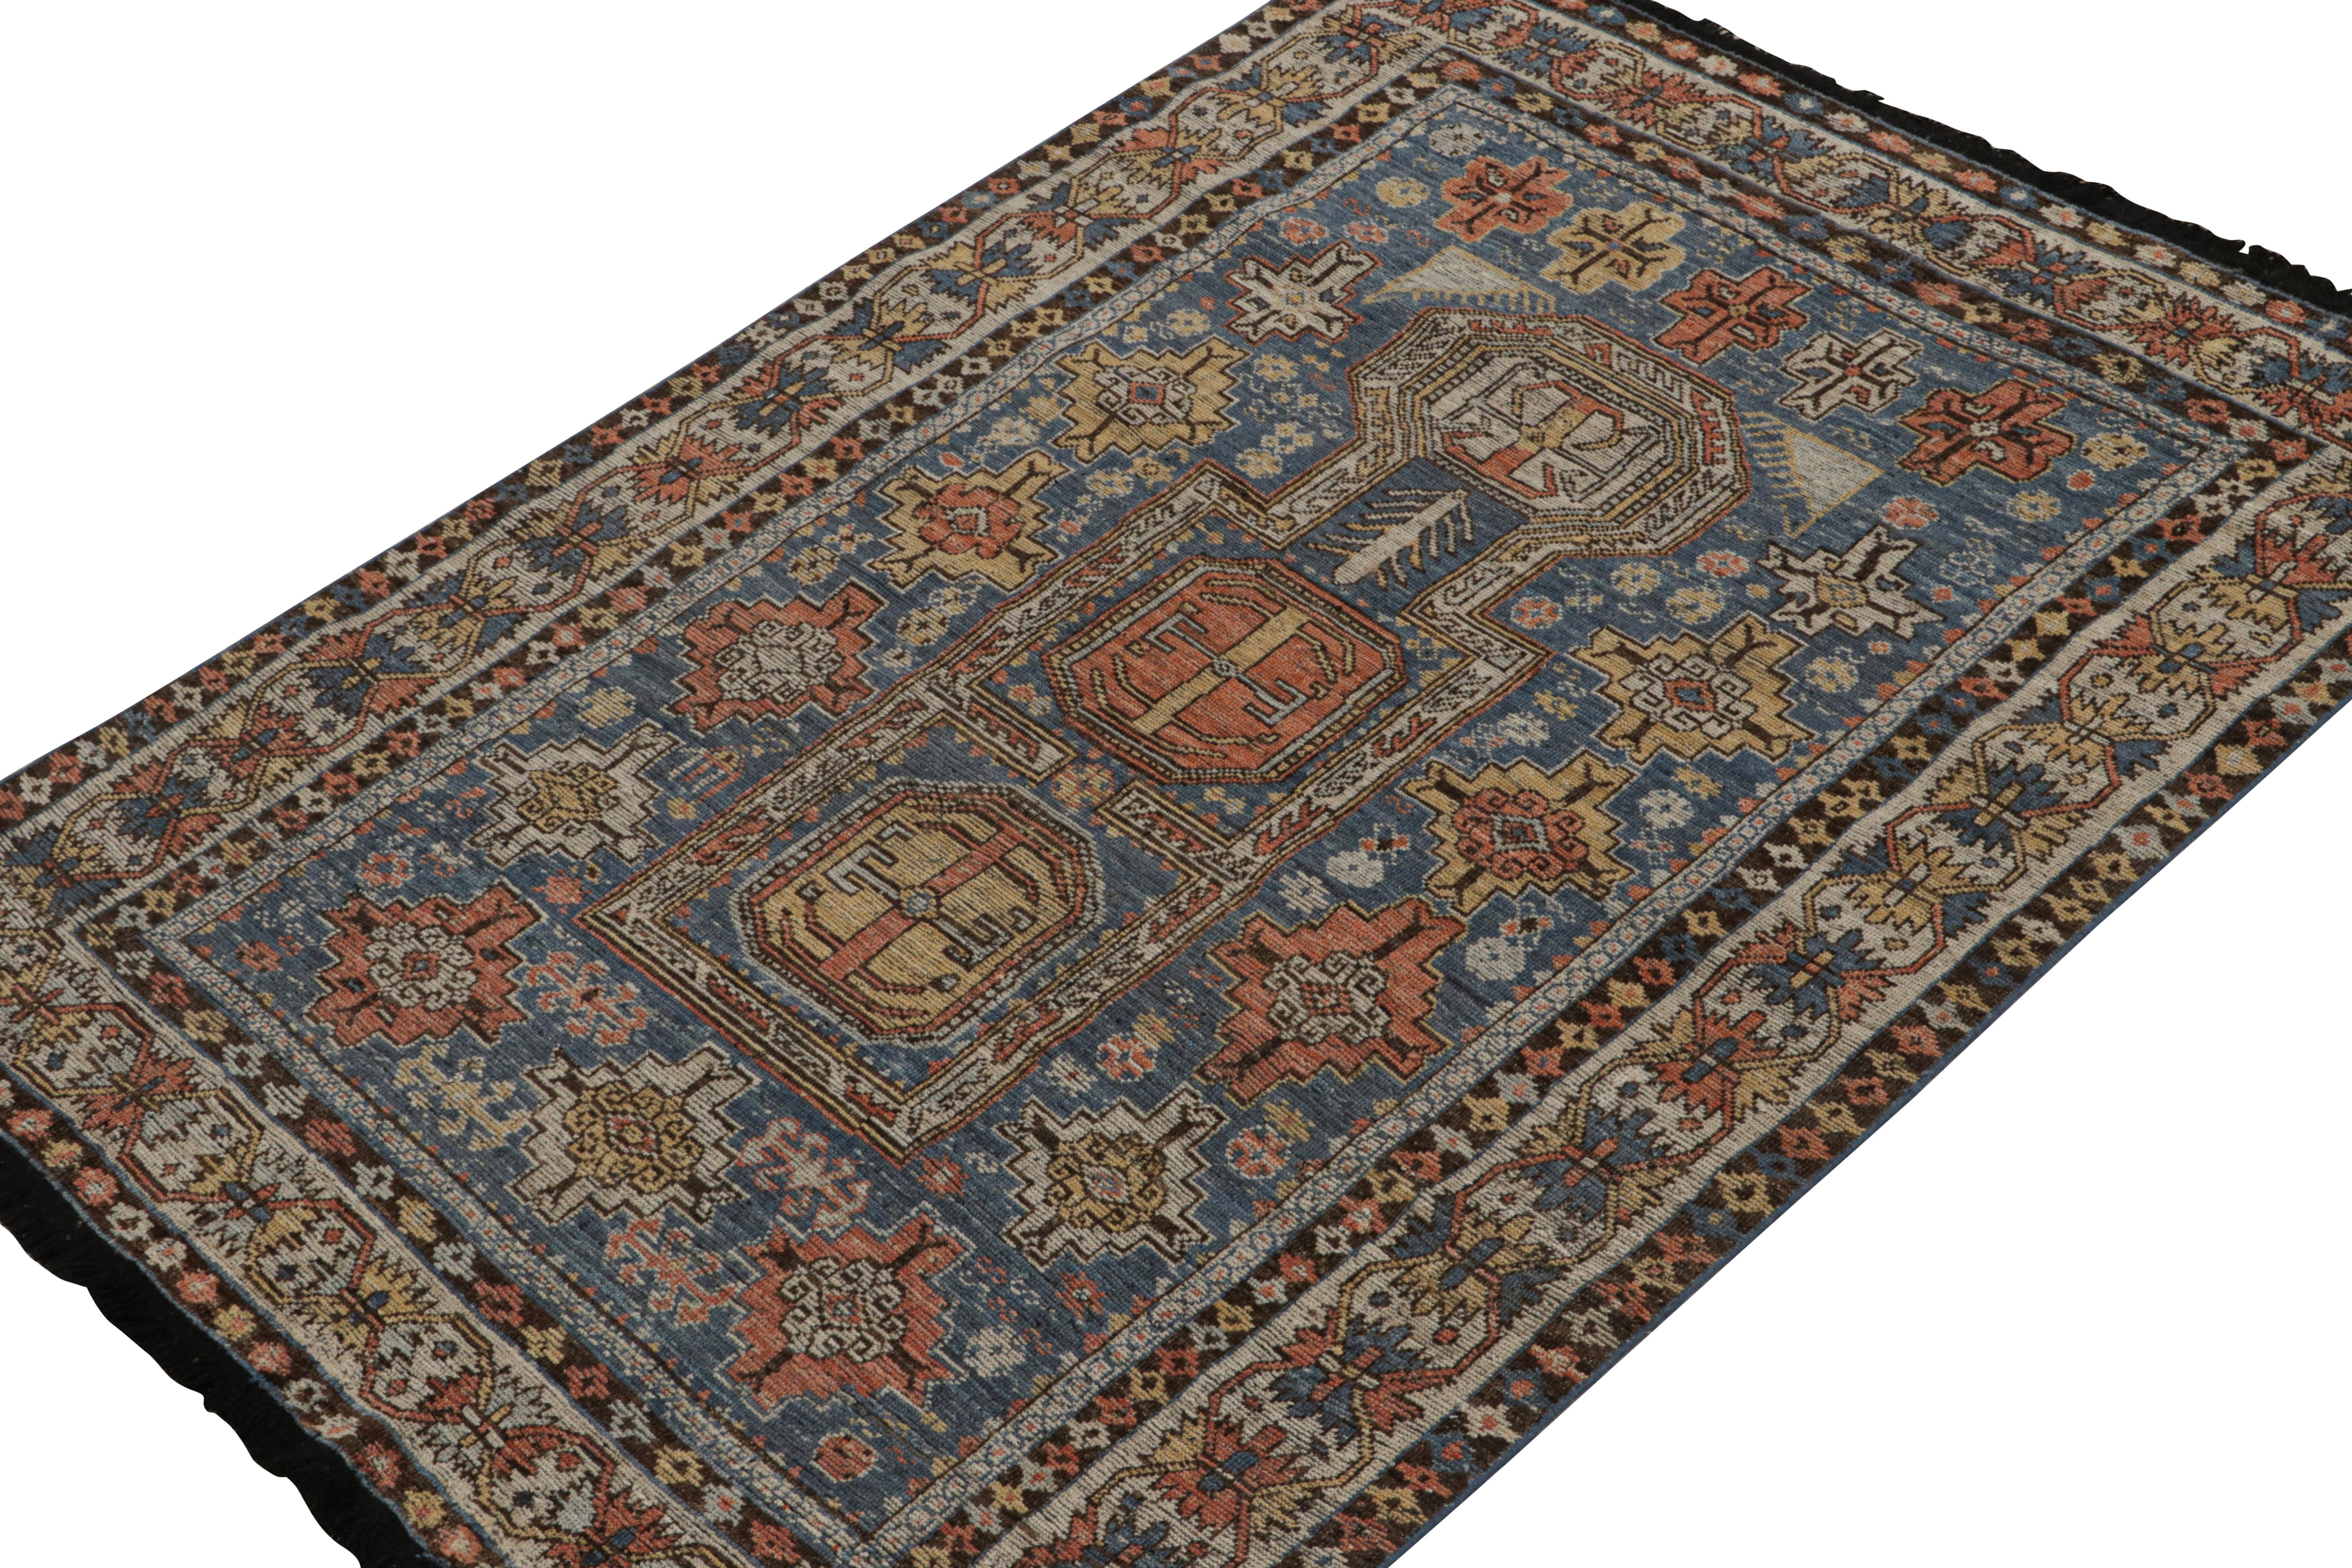 This 5x7 rug is a grand new entry to Rug & Kilim’s Burano collection. Hand-knotted in wool.

Further on the Design: 

Inspired by antique tribal rugs, this rug revels in blue, brown, gold & black with defined movement and traditional sensibility.